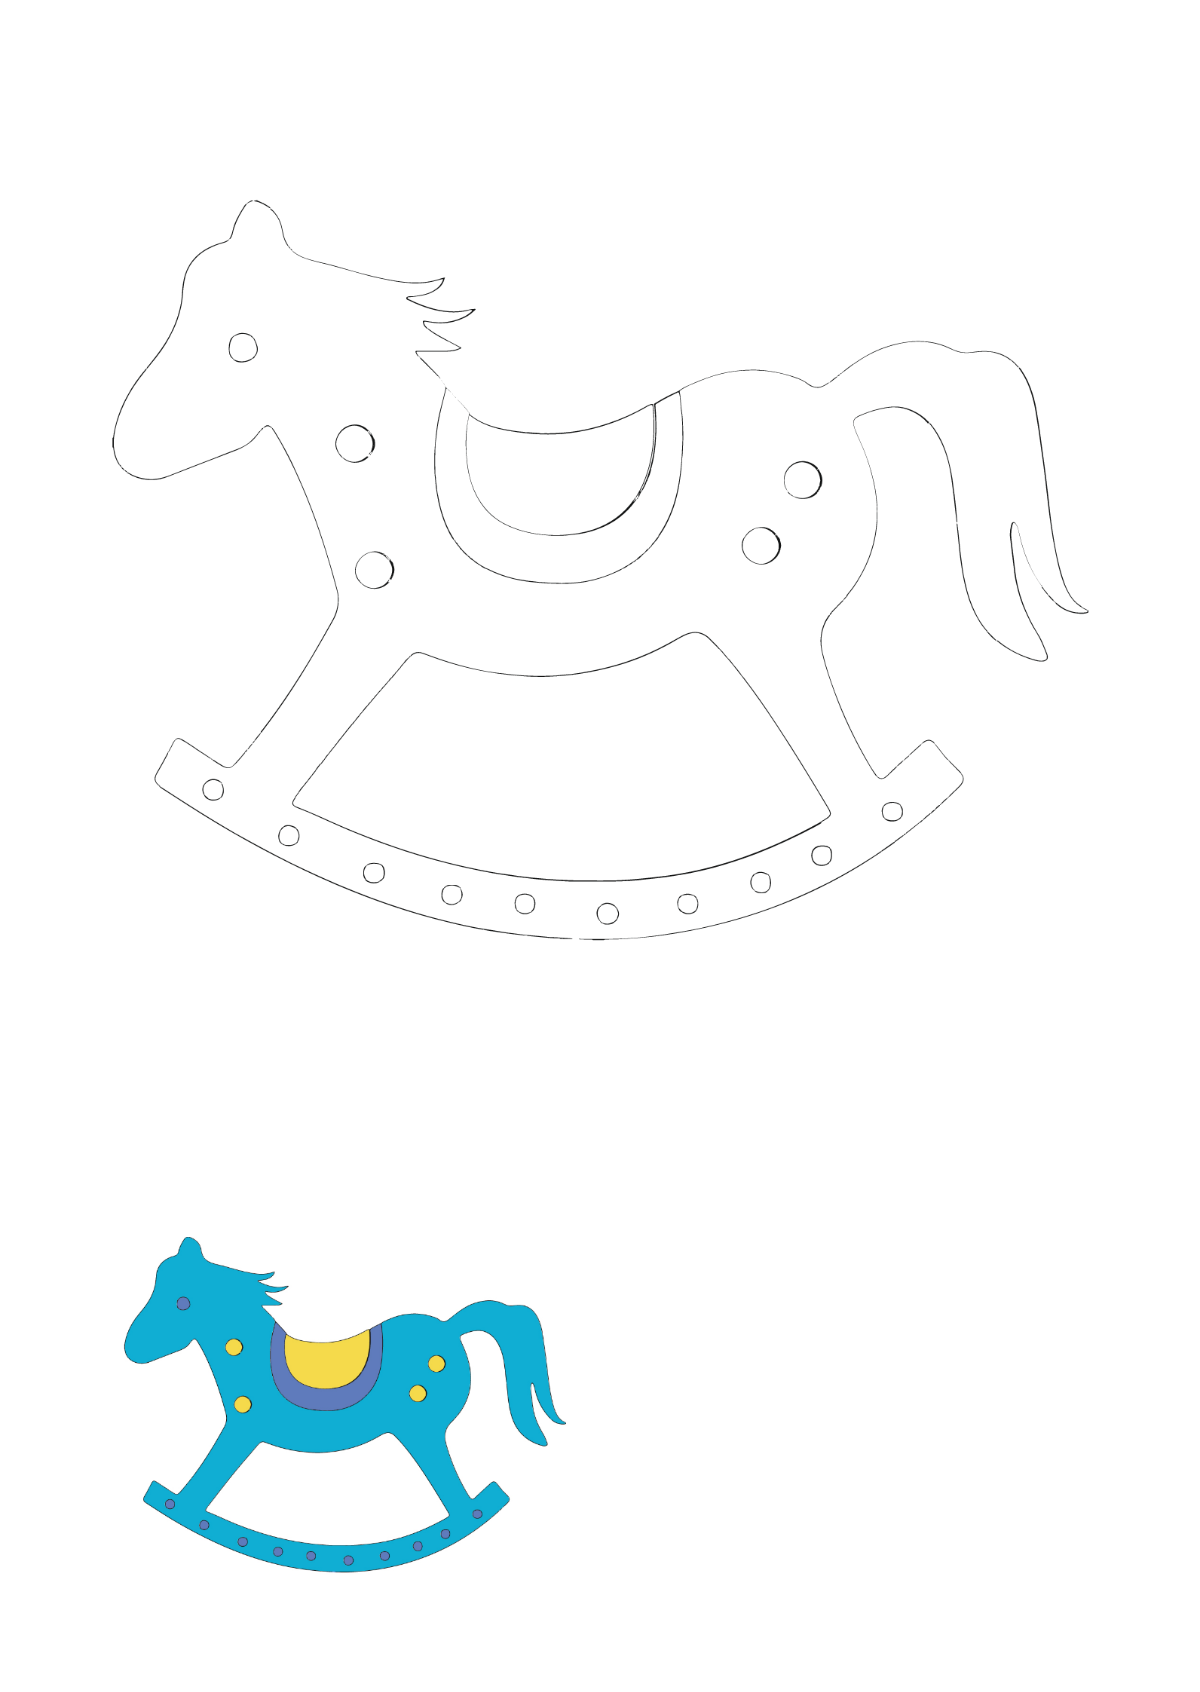 Rocking Horse Coloring Page Template